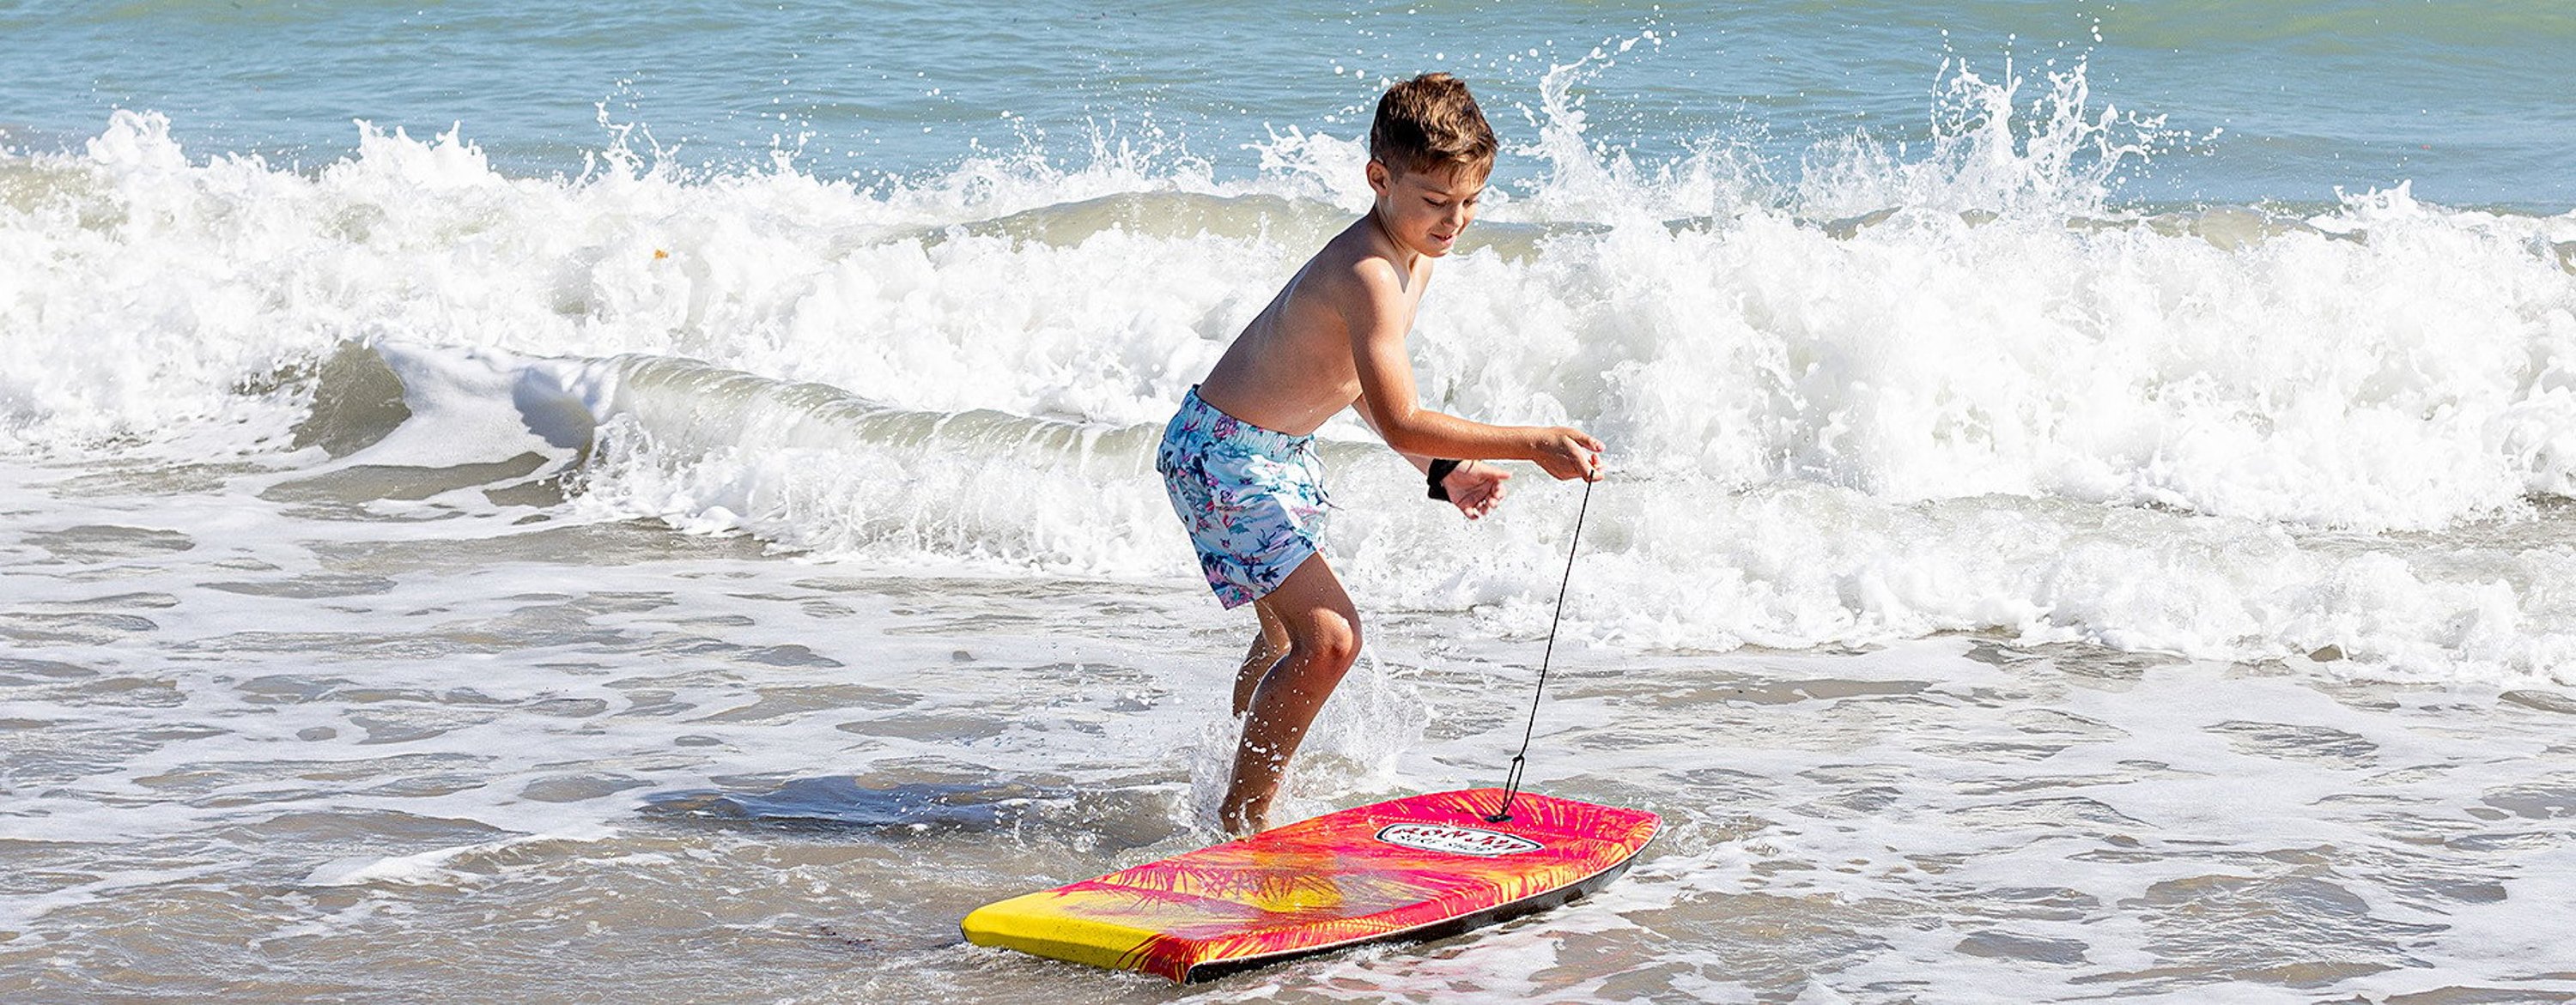 young boy at the ocean with a bodyboard